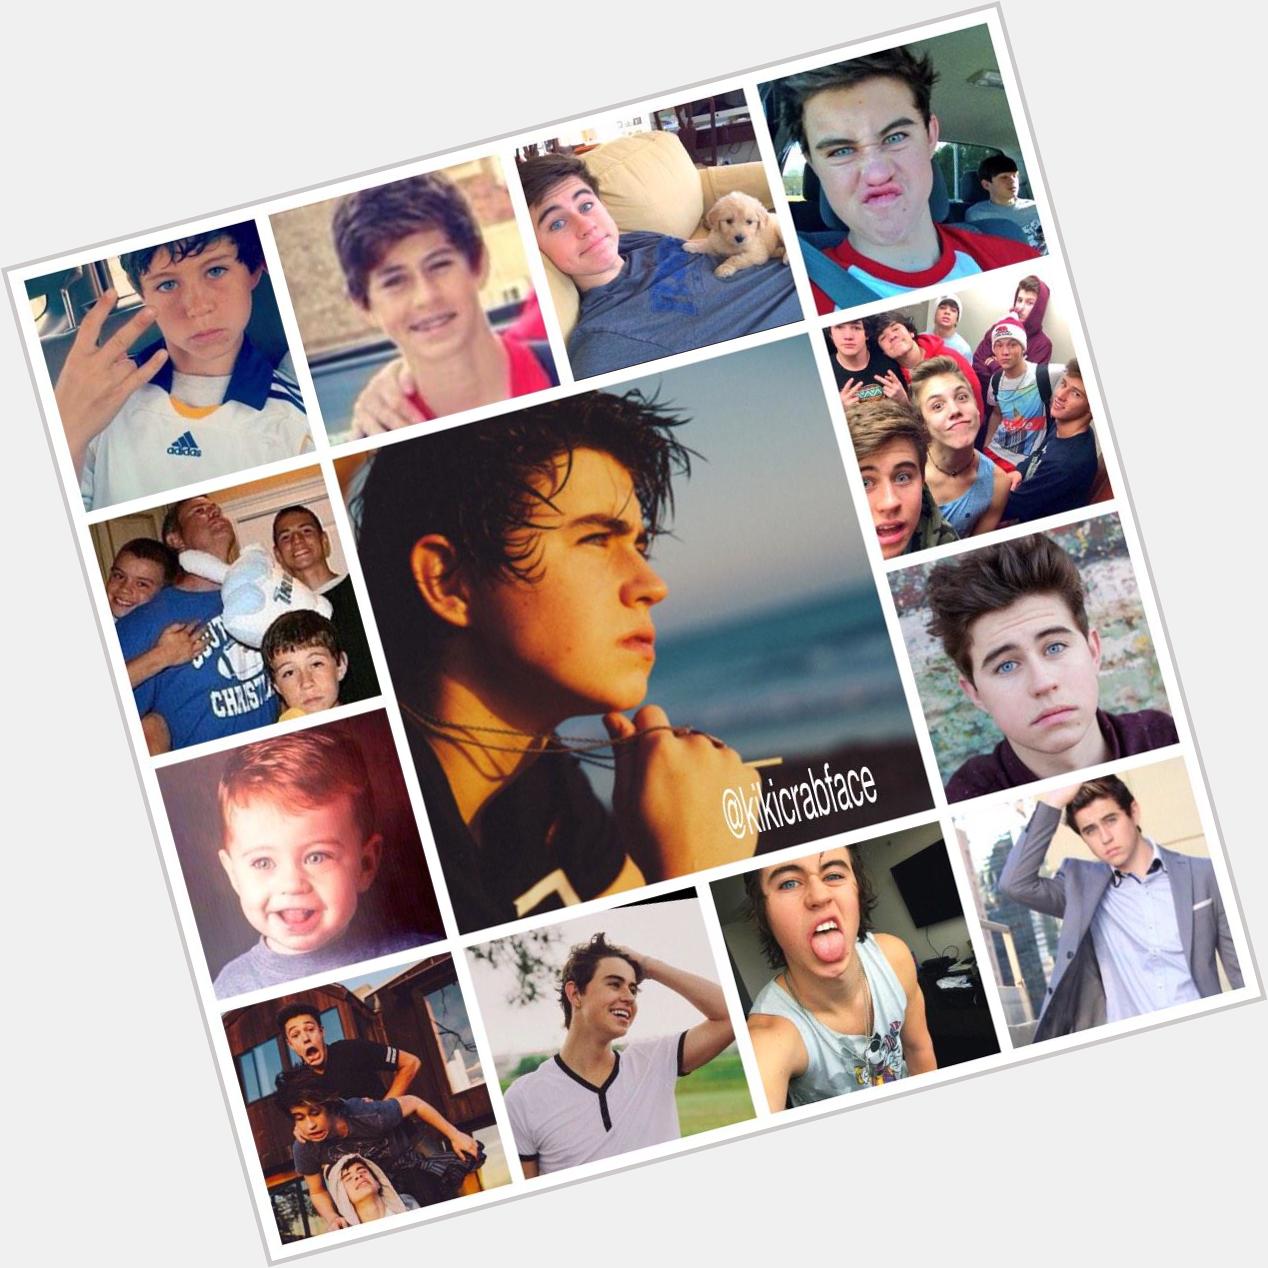 Nash Grier happy 17th birthday, thank u so so much for always making me laugh and smile I love u 